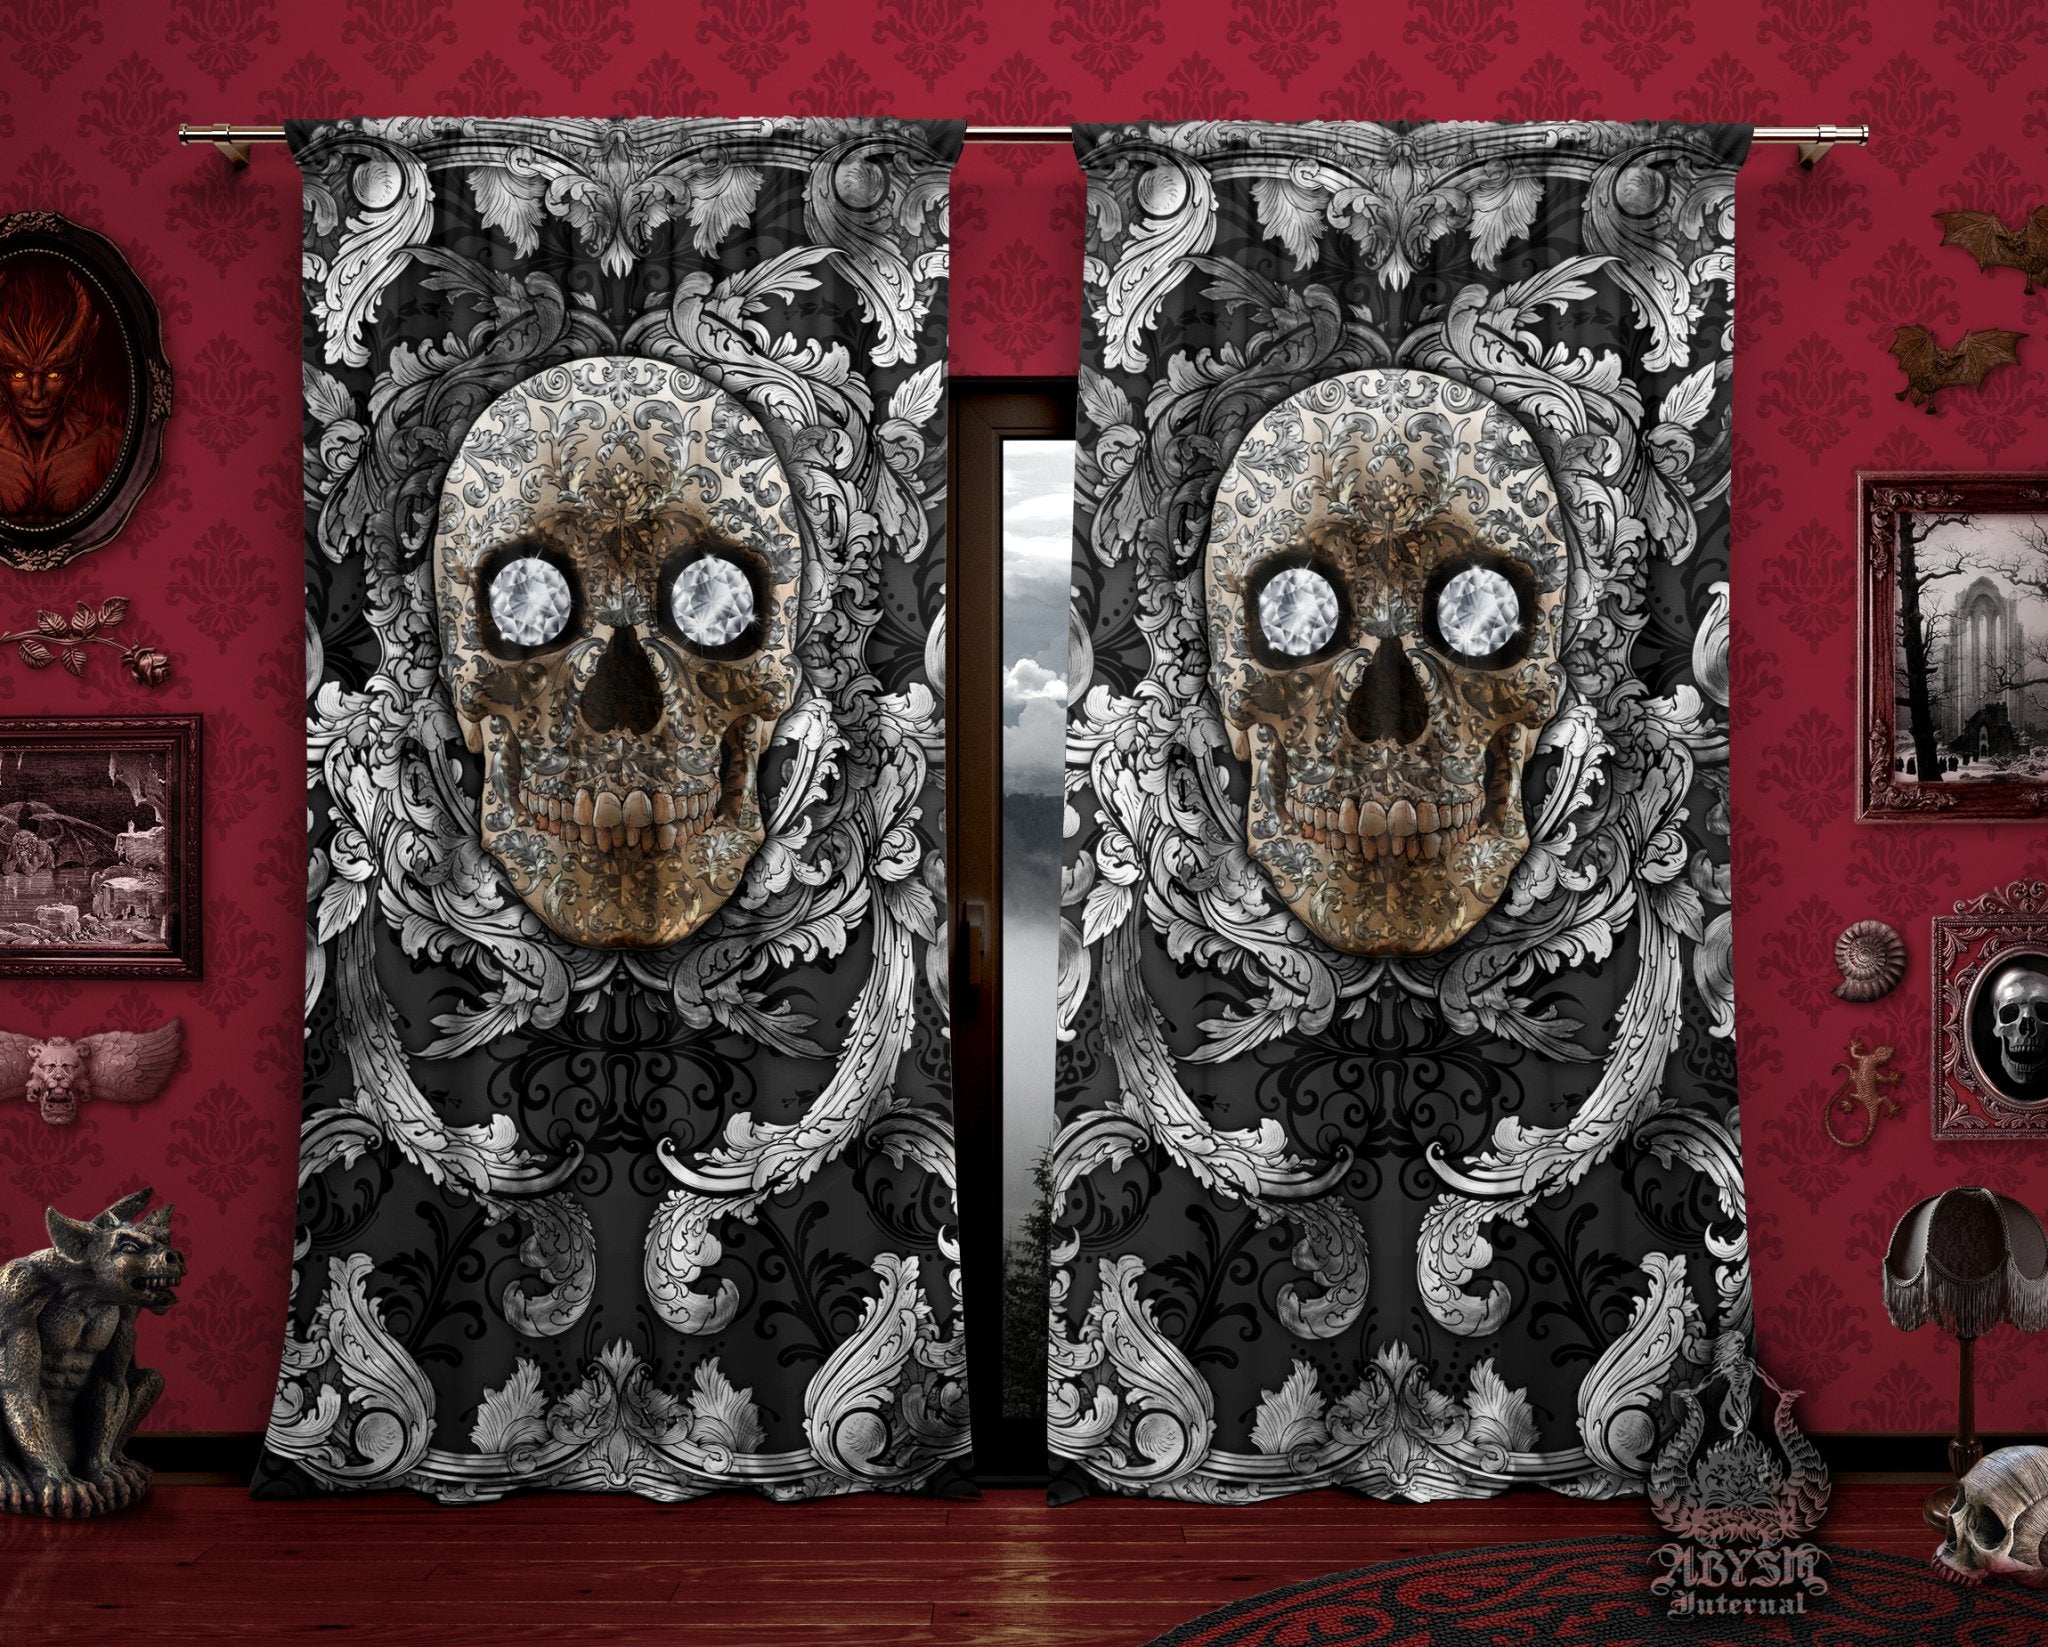 Silver Skull Curtains, 50x84' Printed Window Panels, Macabre Art Print, Baroque Goth Home Decor - Roses or Diamonds, 2 versions - Abysm Internal